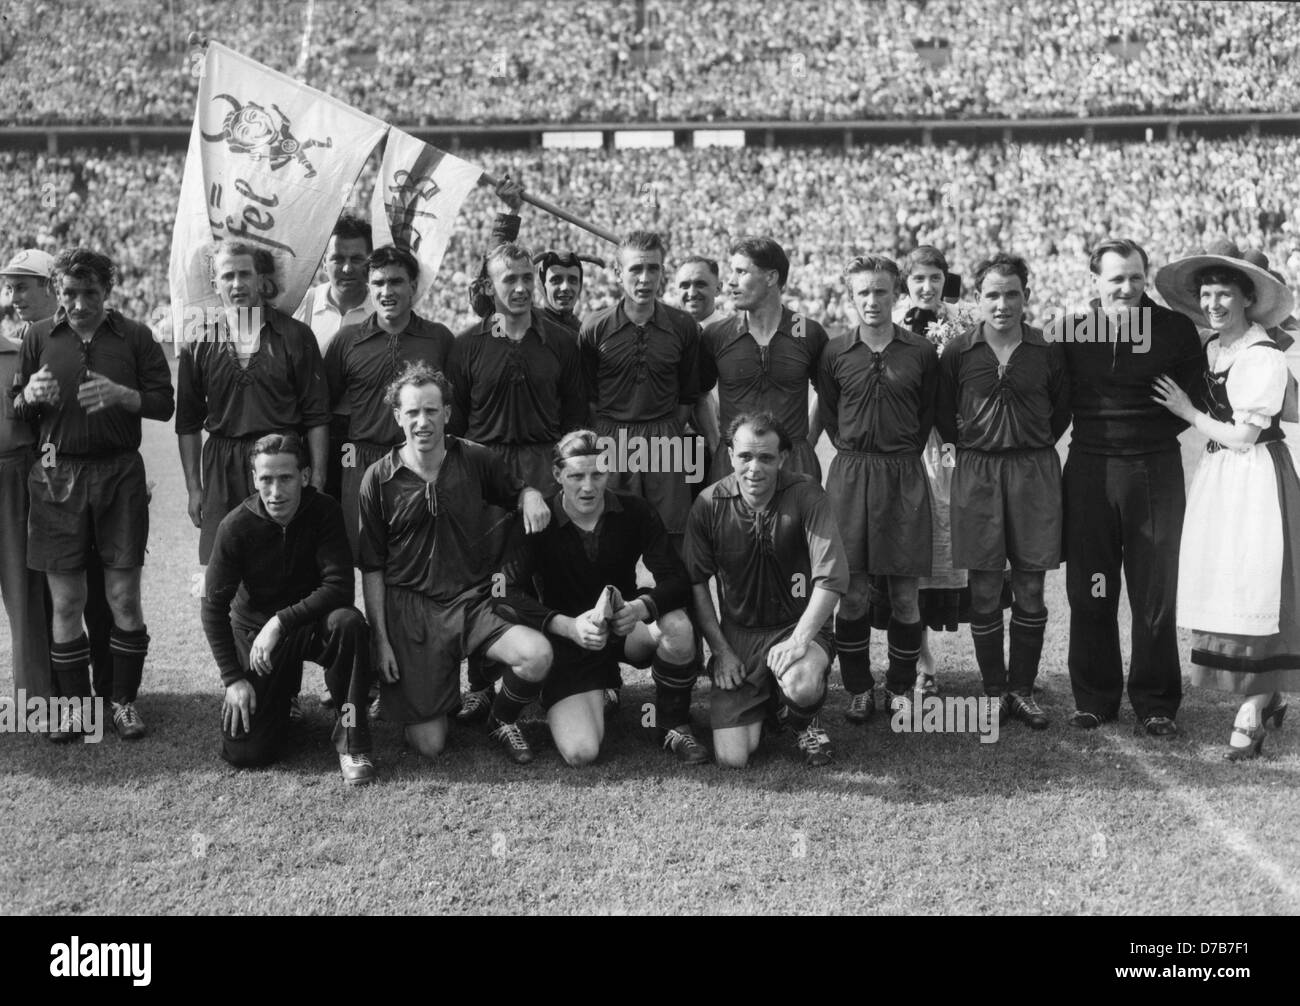 The team of 1. FC Kaiserslautern wins the German Championship on the 21st of June in 1953 against VfB Stuttgart with 4:1. National players Fritz Walter und Werner Liebrich (standing, from left), Horst Eckel (standing, 5th of left)), Ottmar Walter (6th of left) und Werner Kohlmeyer (on his knees, r) play for the 1. FC Kaiserslautern. Stock Photo